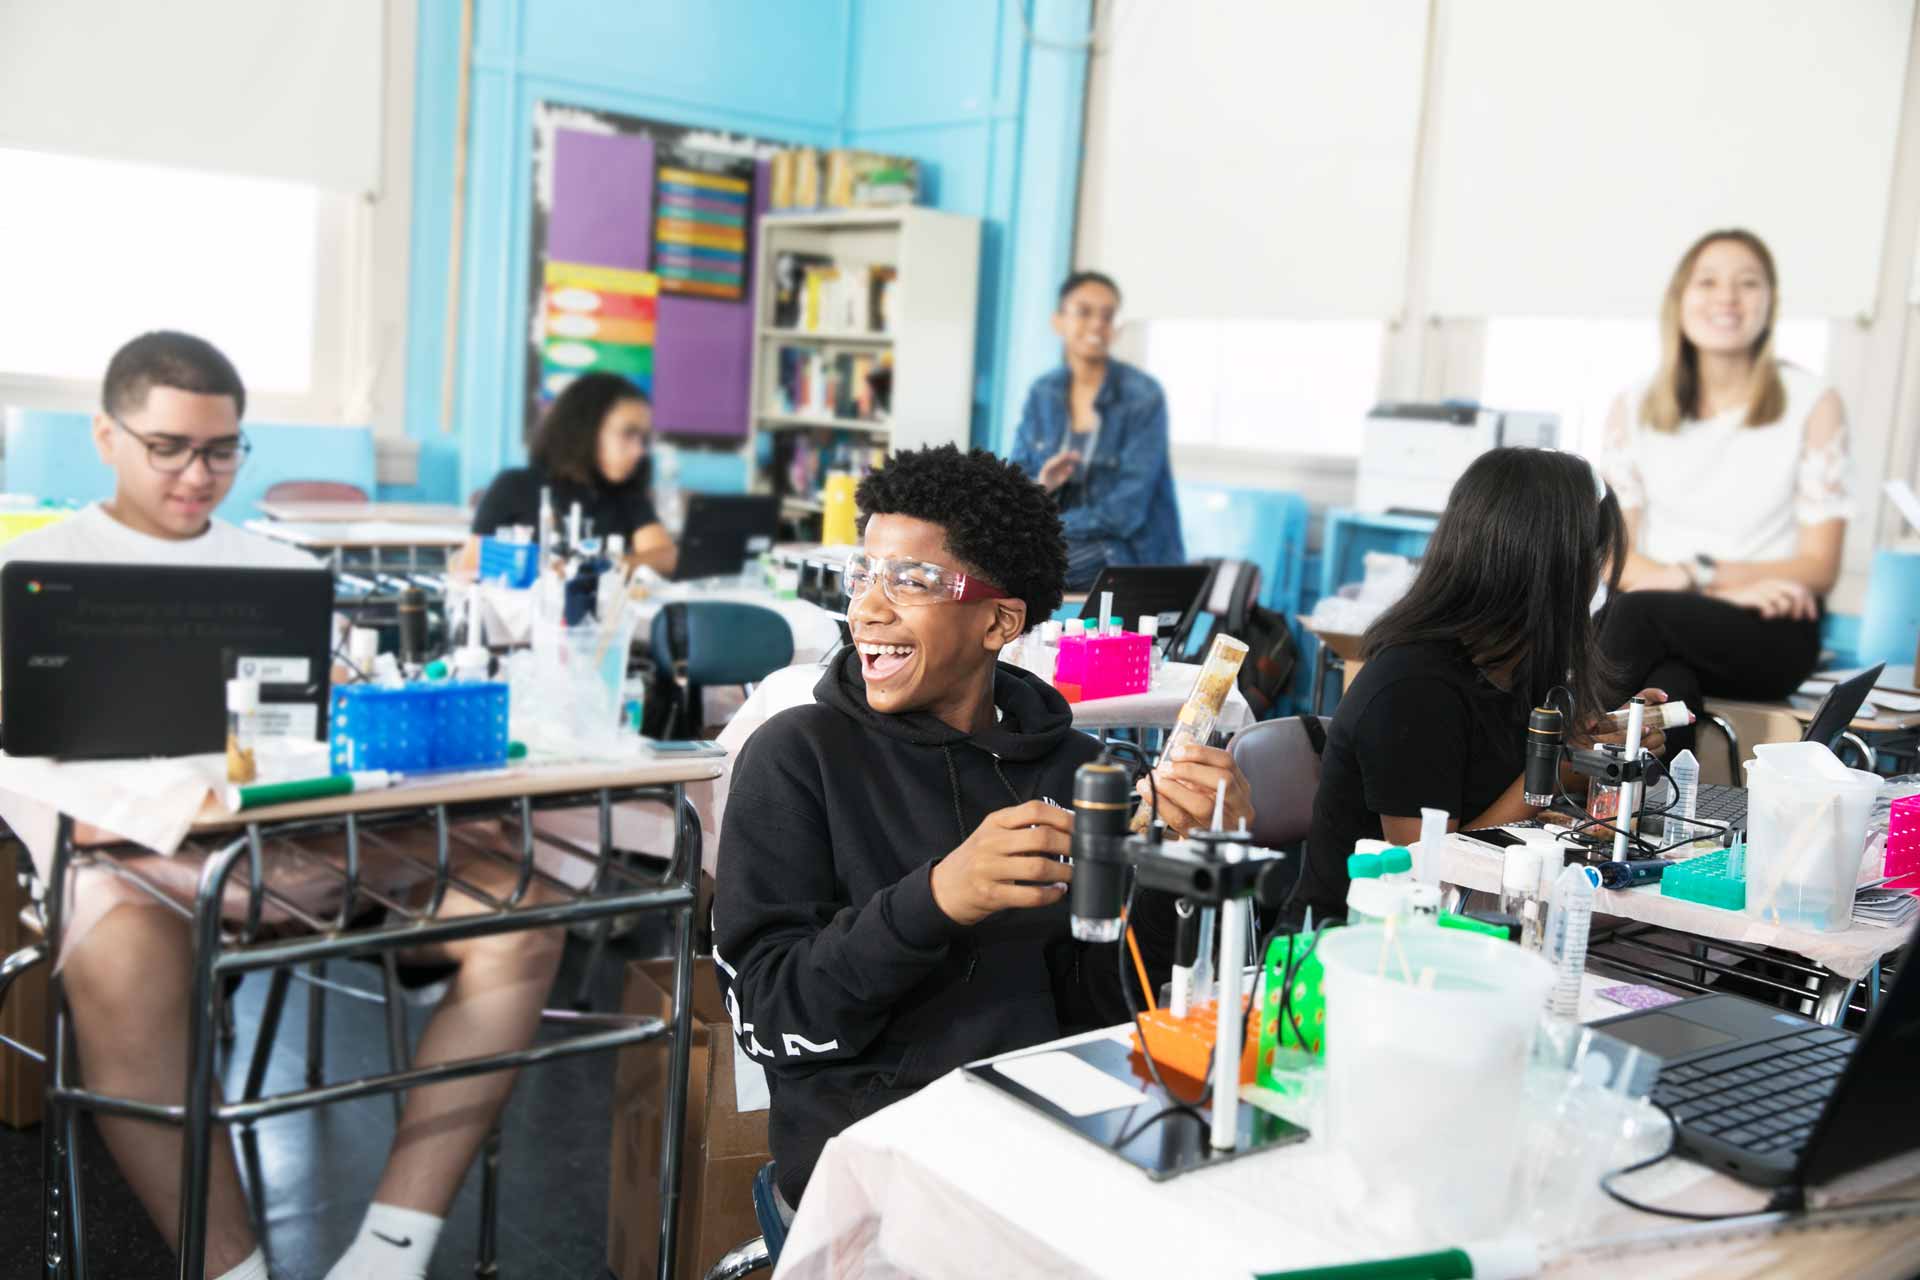 University Heights High School students laugh and talk with each other with a science experiment kit